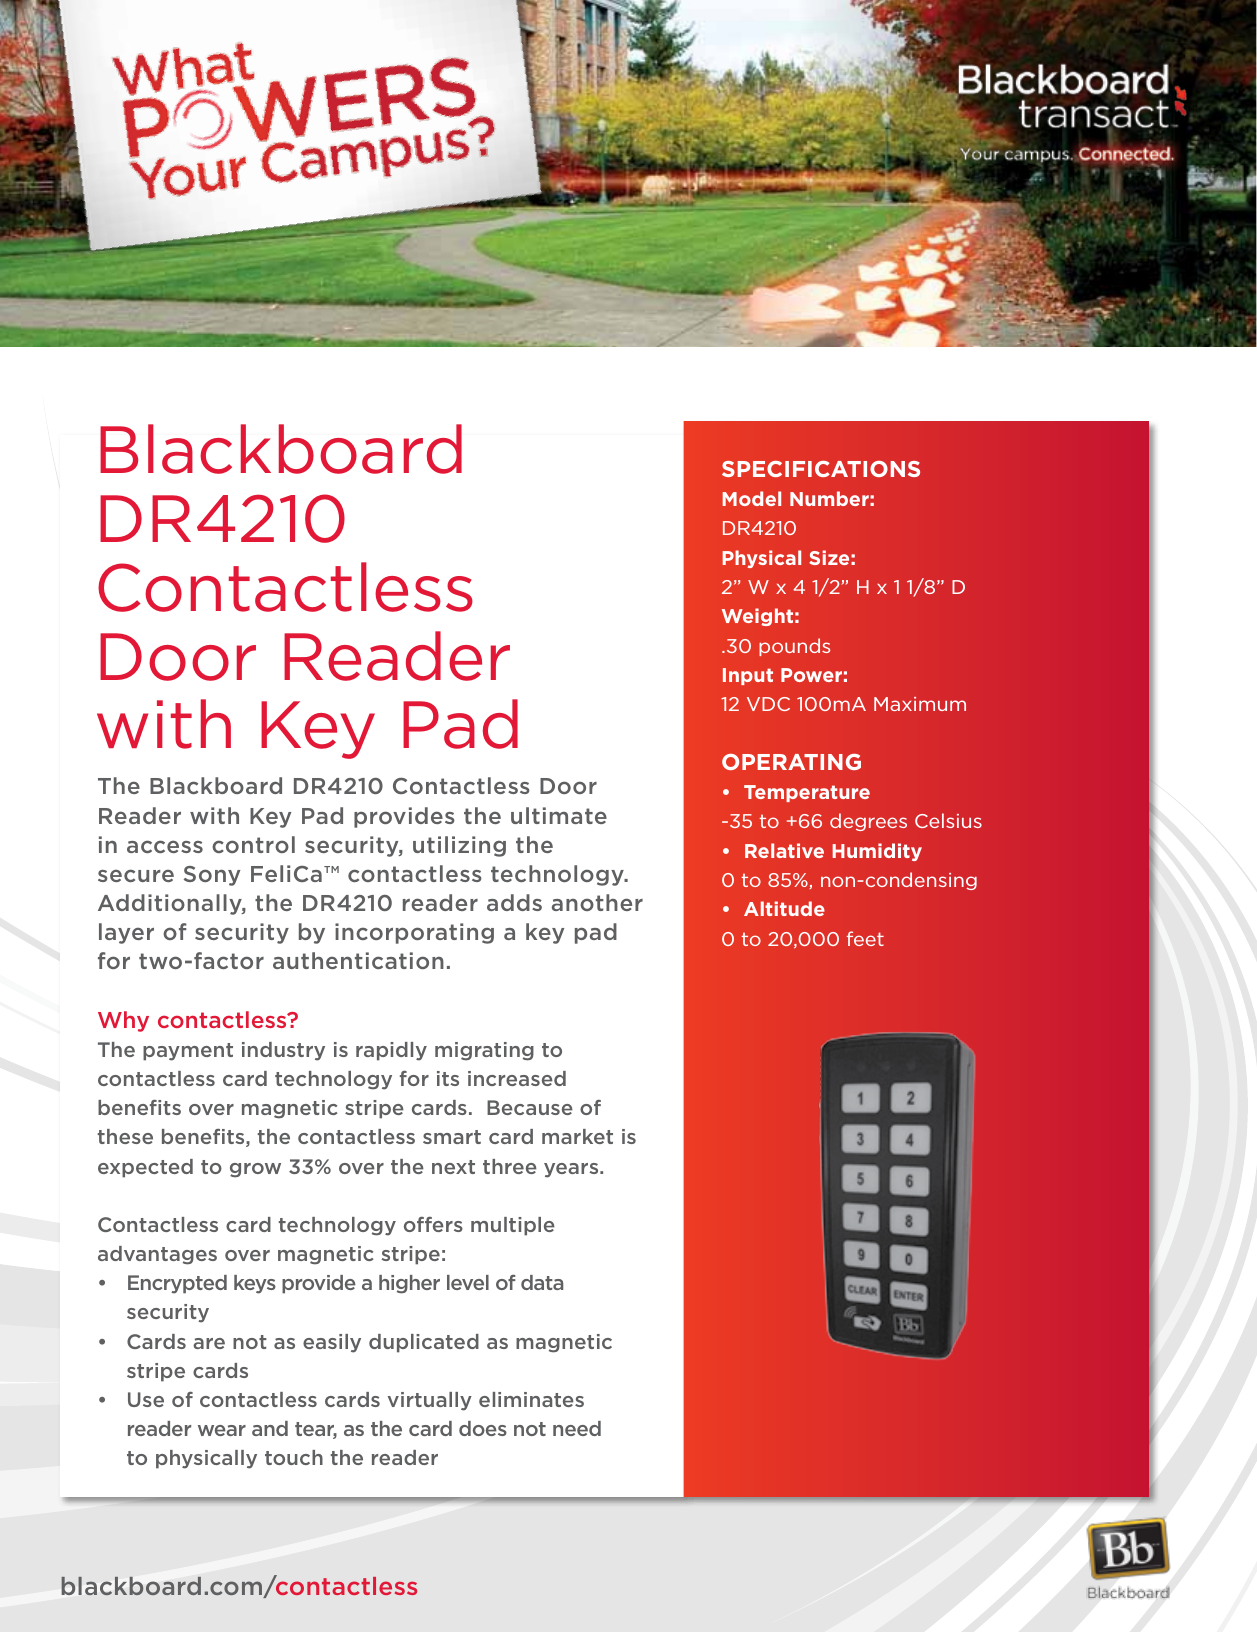 The Blackboard DR4210 Contactless Door Reader with Key Pad provides the ultimate in access control security, utilizing the secure Sony FeliCa™ contactless technology. Additionally, the DR4210 reader adds another layer of security by incorporating a key pad for two-factor authentication.Why contactless?The payment industry is rapidly migrating to contactless card technology for its increased beneﬁts over magnetic stripe cards.  Because of these beneﬁts, the contactless smart card market is expected to grow 33% over the next three years.Contactless card technology offers multiple advantages over magnetic stripe:• Encryptedkeysprovideahigherlevelofdata security• Cardsarenotaseasilyduplicatedasmagnetic  stripe cards• Useofcontactlesscardsvirtuallyeliminates   reader wear and tear, as the card does not need          to physically touch the readerSPECIFICATIONSModel Number:DR4210Physical Size: 2” W x 4 1/2” H x 1 1/8” DWeight: .30 poundsInput Power:12 VDC 100mA MaximumOPERATING• Temperature-35 to +66 degrees Celsius• RelativeHumidity0 to 85%, non-condensing• Altitude0 to 20,000 feetblackboard.com/contactlessBlackboard DR4210Contactless Door Reader with Key Pad